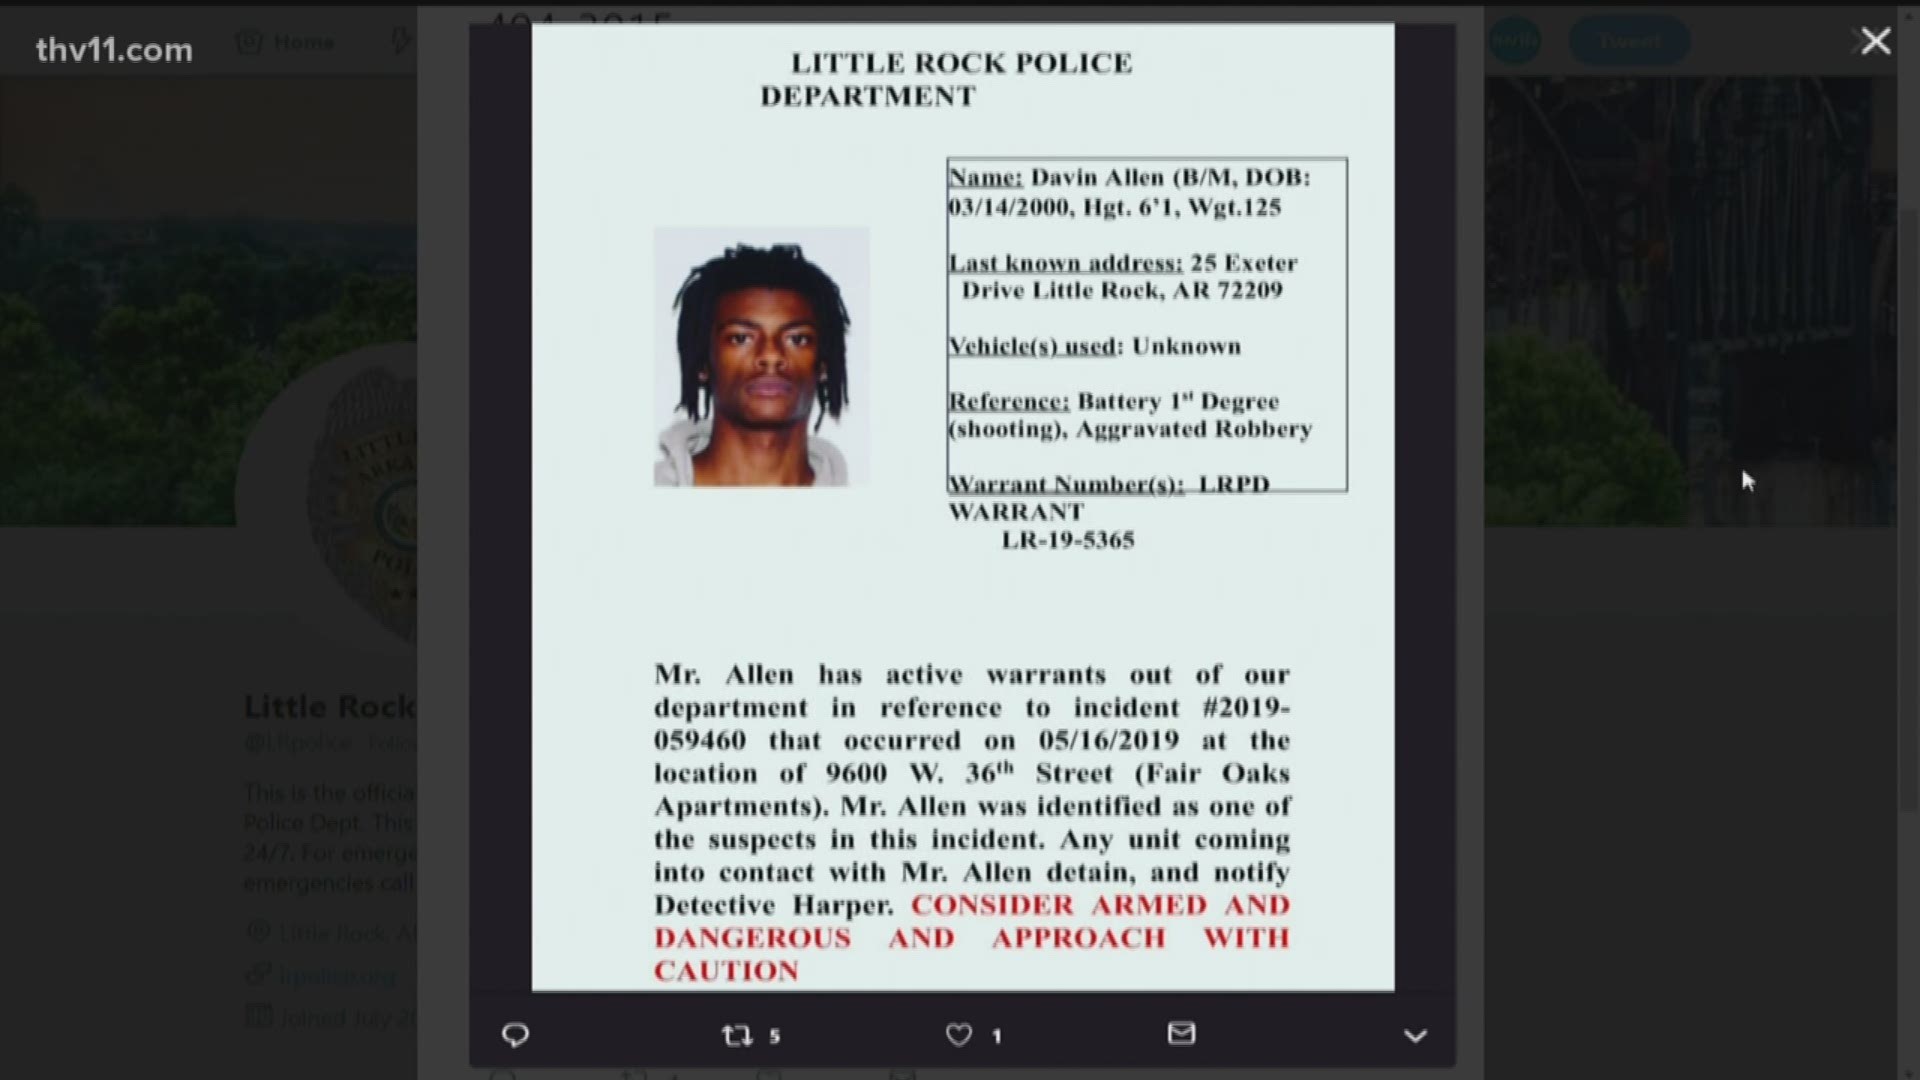 Little Rock police searching for wanted David Allen for aggravated robbery and battery.